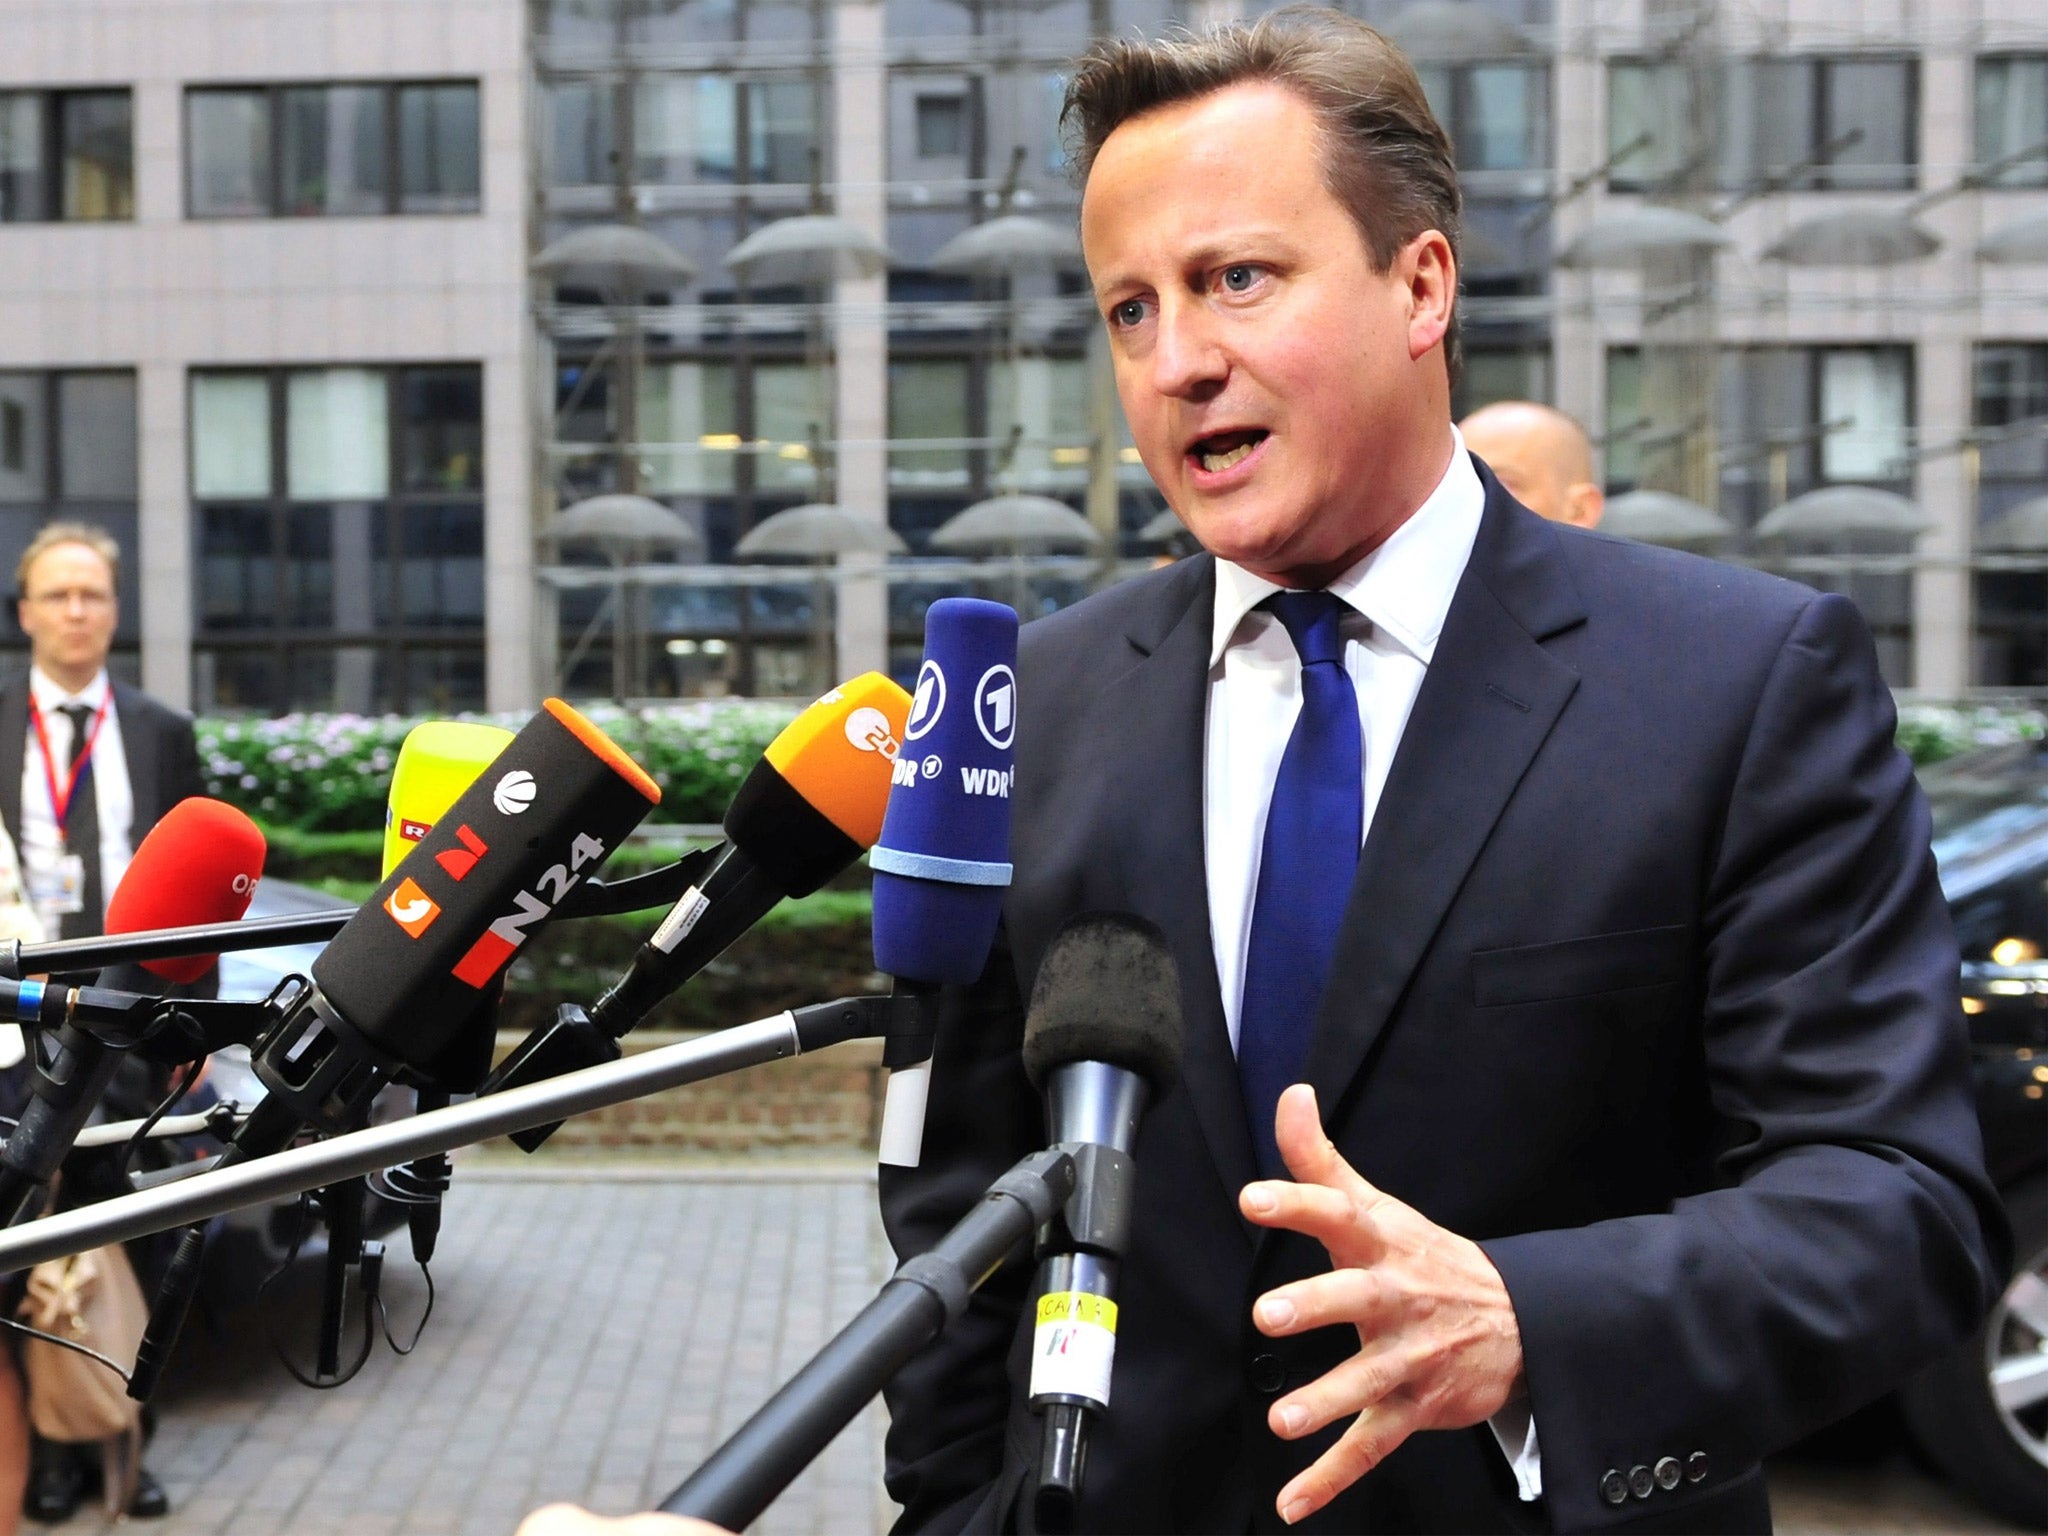 Prime Minister Cameron speaks to media as he arrives in Brussels